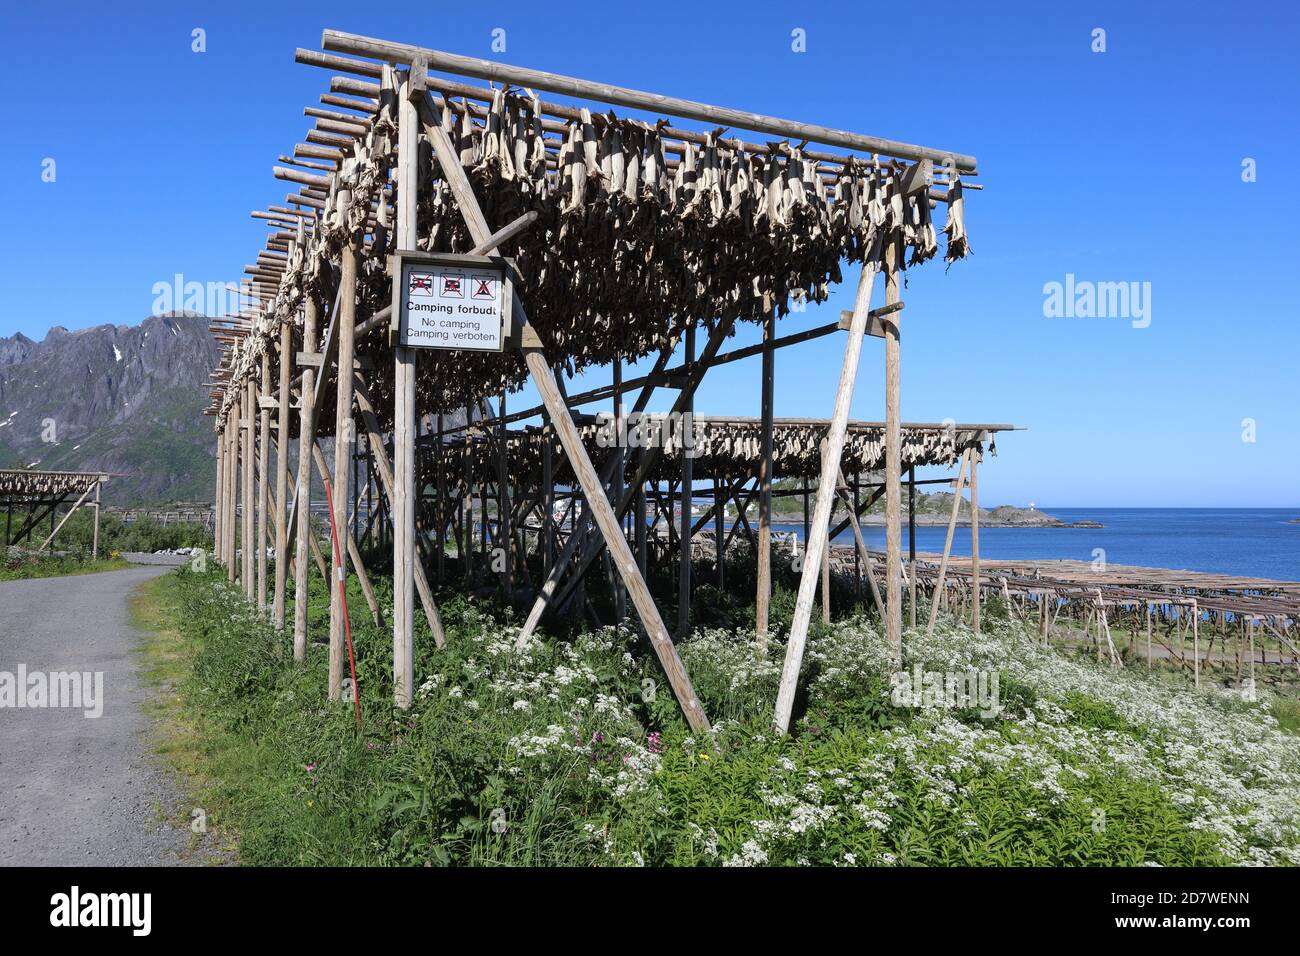 Reine / Norway - June 15 2019: Stockfisch hanging in the air for drying Stock Photo